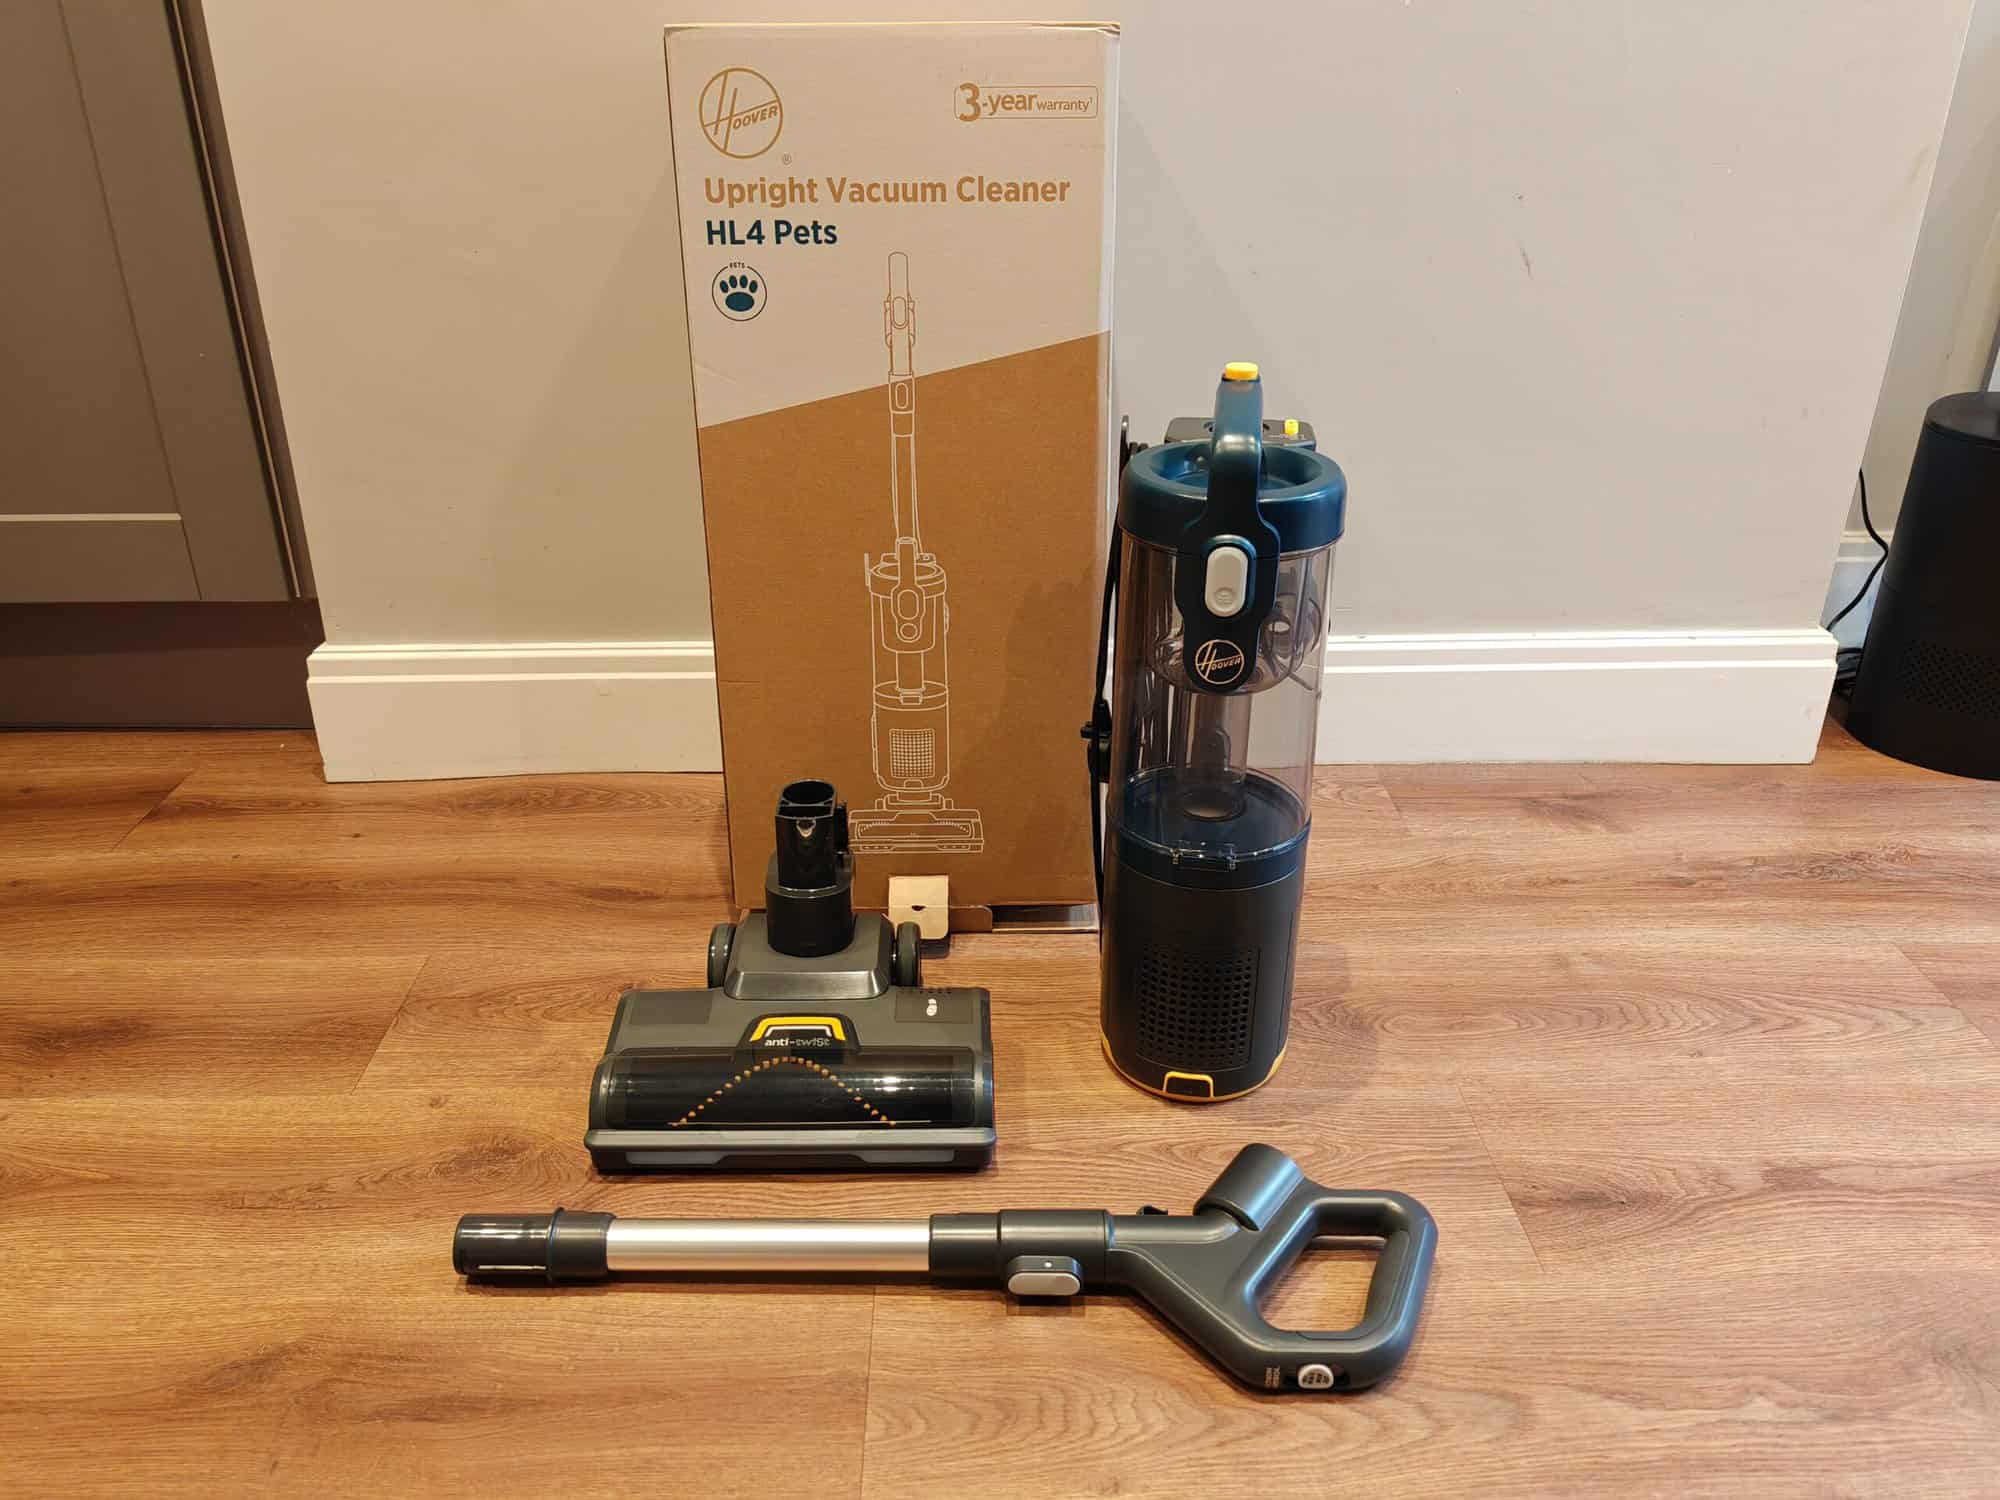 Hoover HL4 Upright Pet Vacuum Cleaner Review – A lightweight corded & bagless vacuum